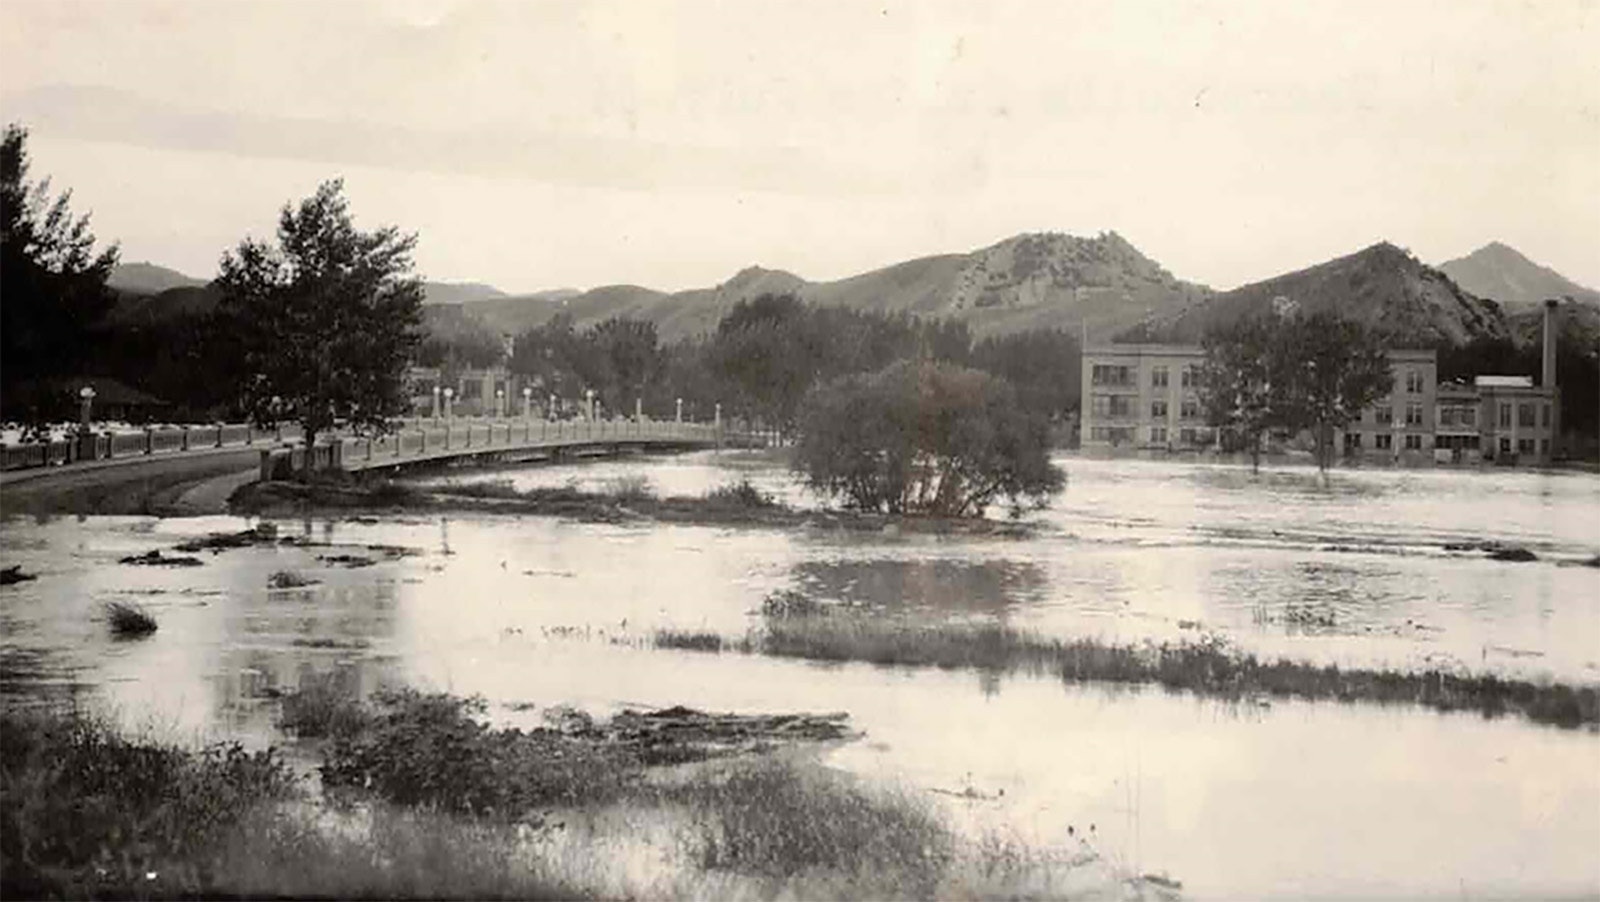 Floodwaters from the Big Horn River surge through Thermopolis on July 24, 1923.